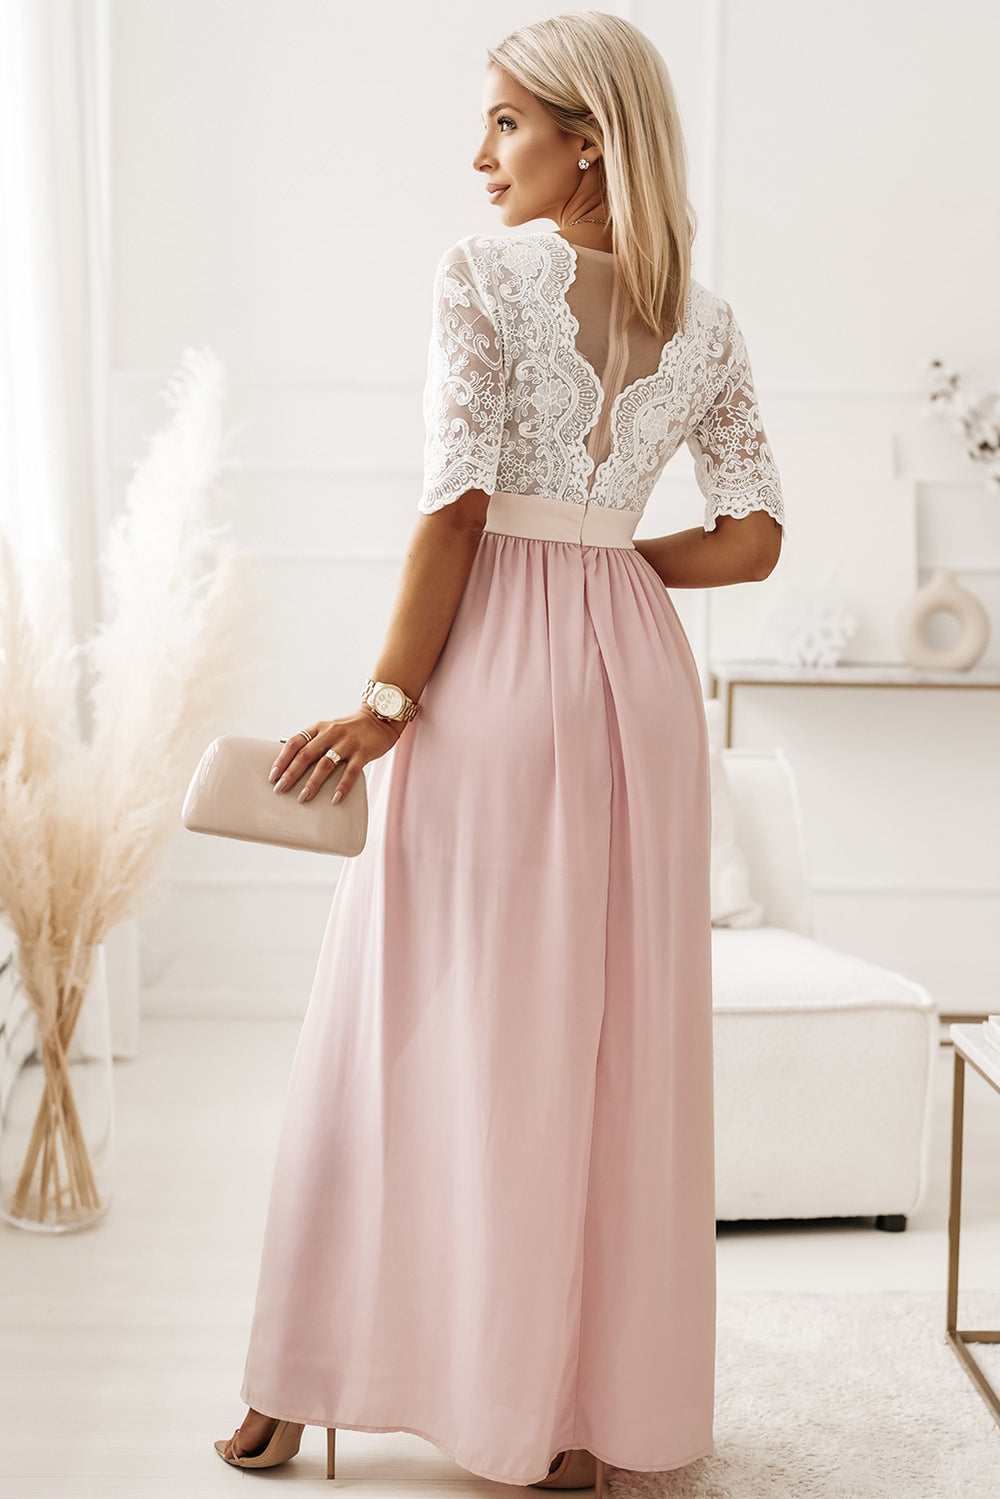 Lace Detail Half Sleeve Slit Maxi Dress - Cheeky Chic Boutique